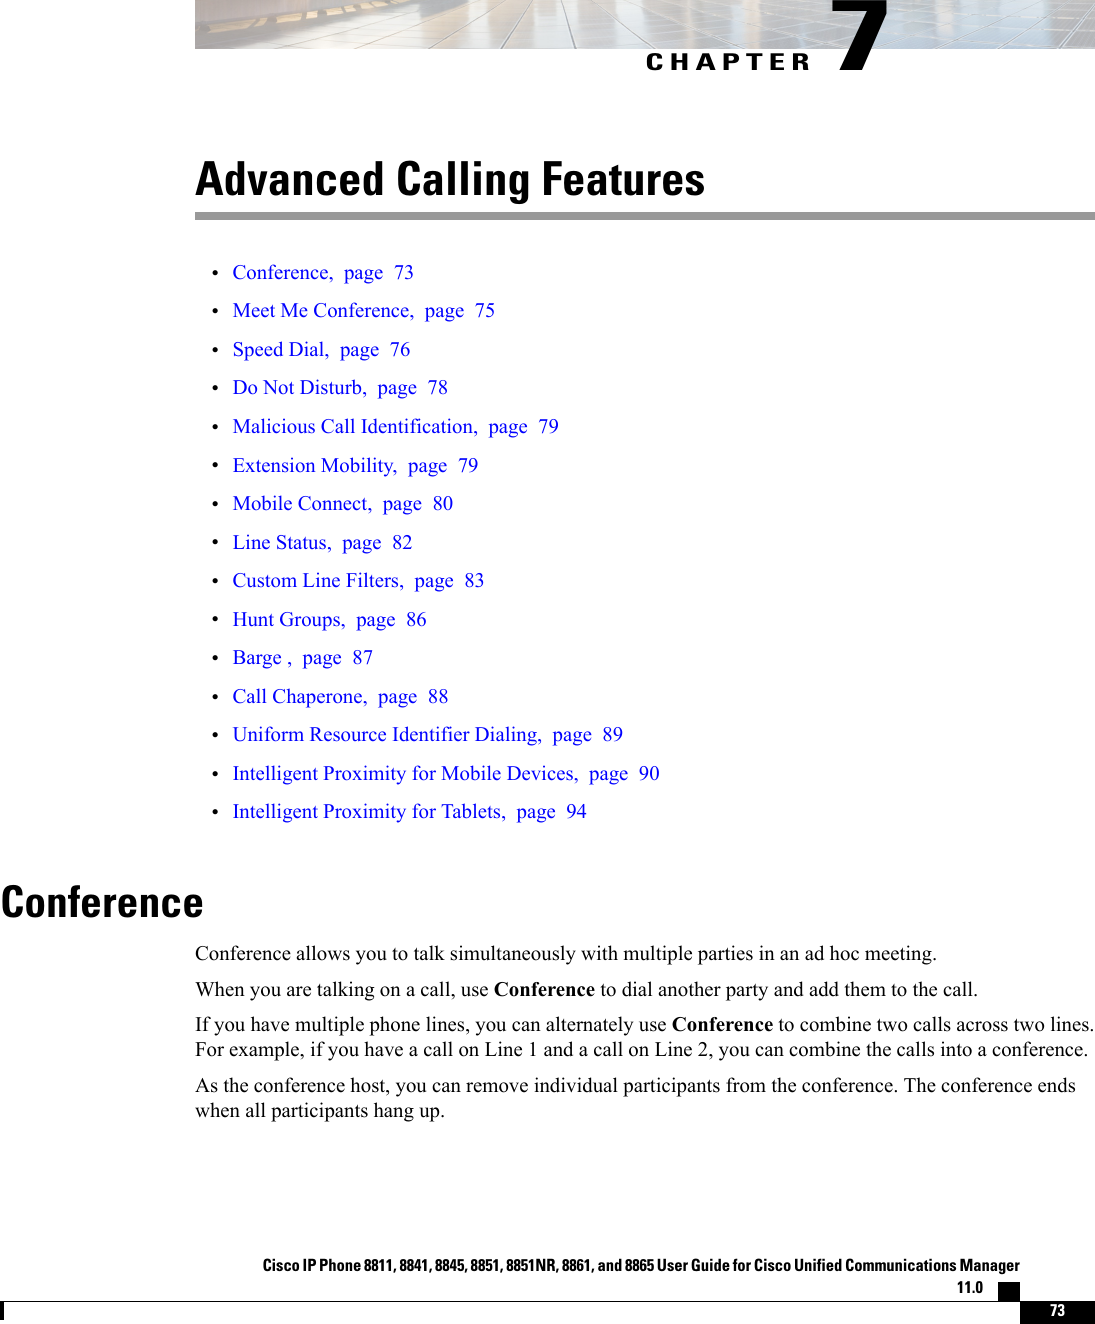 CHAPTER 7Advanced Calling Features•Conference, page 73•Meet Me Conference, page 75•Speed Dial, page 76•Do Not Disturb, page 78•Malicious Call Identification, page 79•Extension Mobility, page 79•Mobile Connect, page 80•Line Status, page 82•Custom Line Filters, page 83•Hunt Groups, page 86•Barge , page 87•Call Chaperone, page 88•Uniform Resource Identifier Dialing, page 89•Intelligent Proximity for Mobile Devices, page 90•Intelligent Proximity for Tablets, page 94ConferenceConference allows you to talk simultaneously with multiple parties in an ad hoc meeting.When you are talking on a call, use Conference to dial another party and add them to the call.If you have multiple phone lines, you can alternately use Conference to combine two calls across two lines.For example, if you have a call on Line 1 and a call on Line 2, you can combine the calls into a conference.As the conference host, you can remove individual participants from the conference. The conference endswhen all participants hang up.Cisco IP Phone 8811, 8841, 8845, 8851, 8851NR, 8861, and 8865 User Guide for Cisco Unified Communications Manager11.0    73